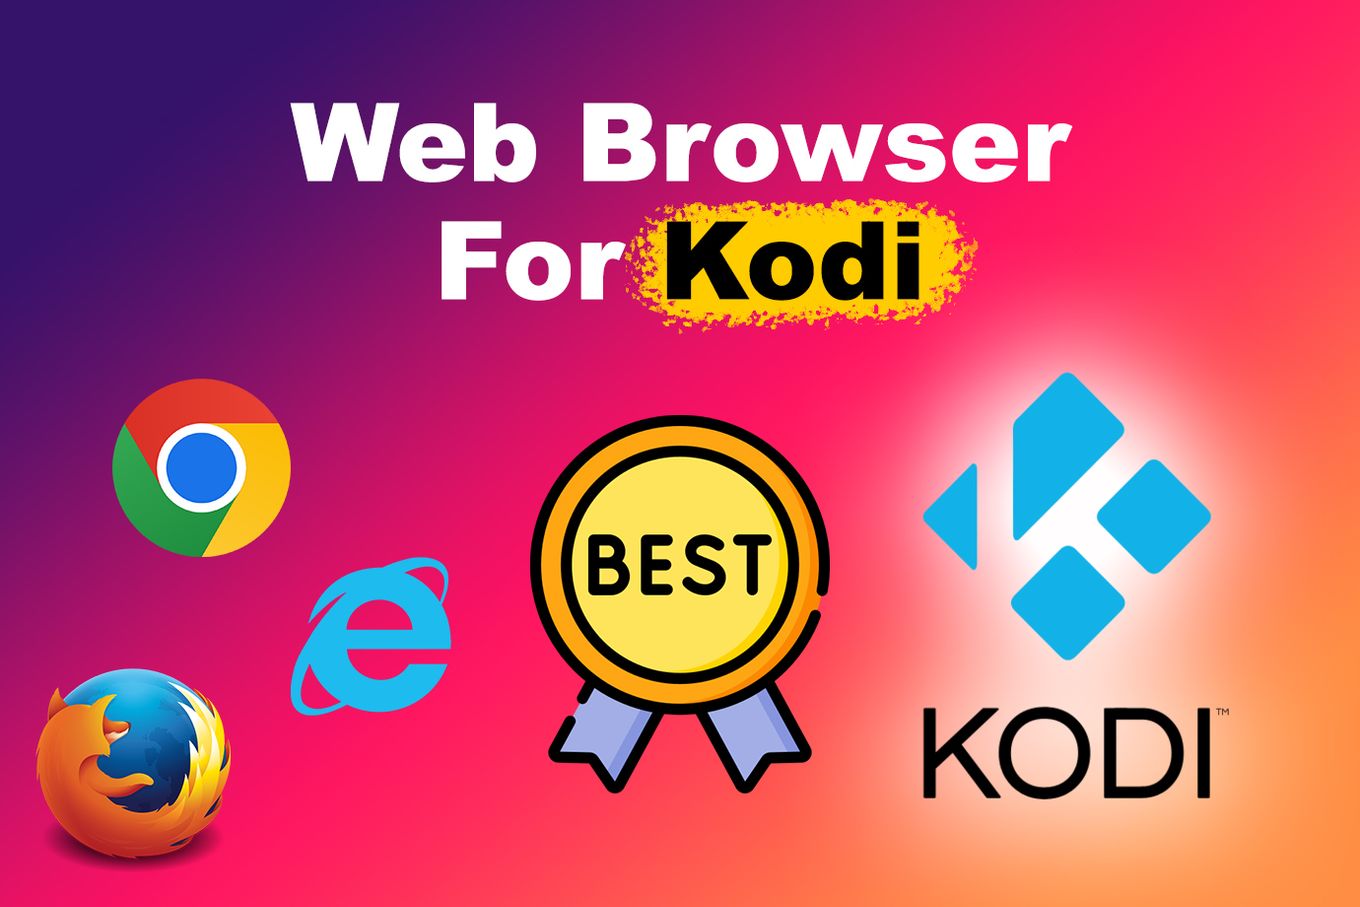 Open a web browser and search for the official Kodi website
Download and install the latest version of Kodi